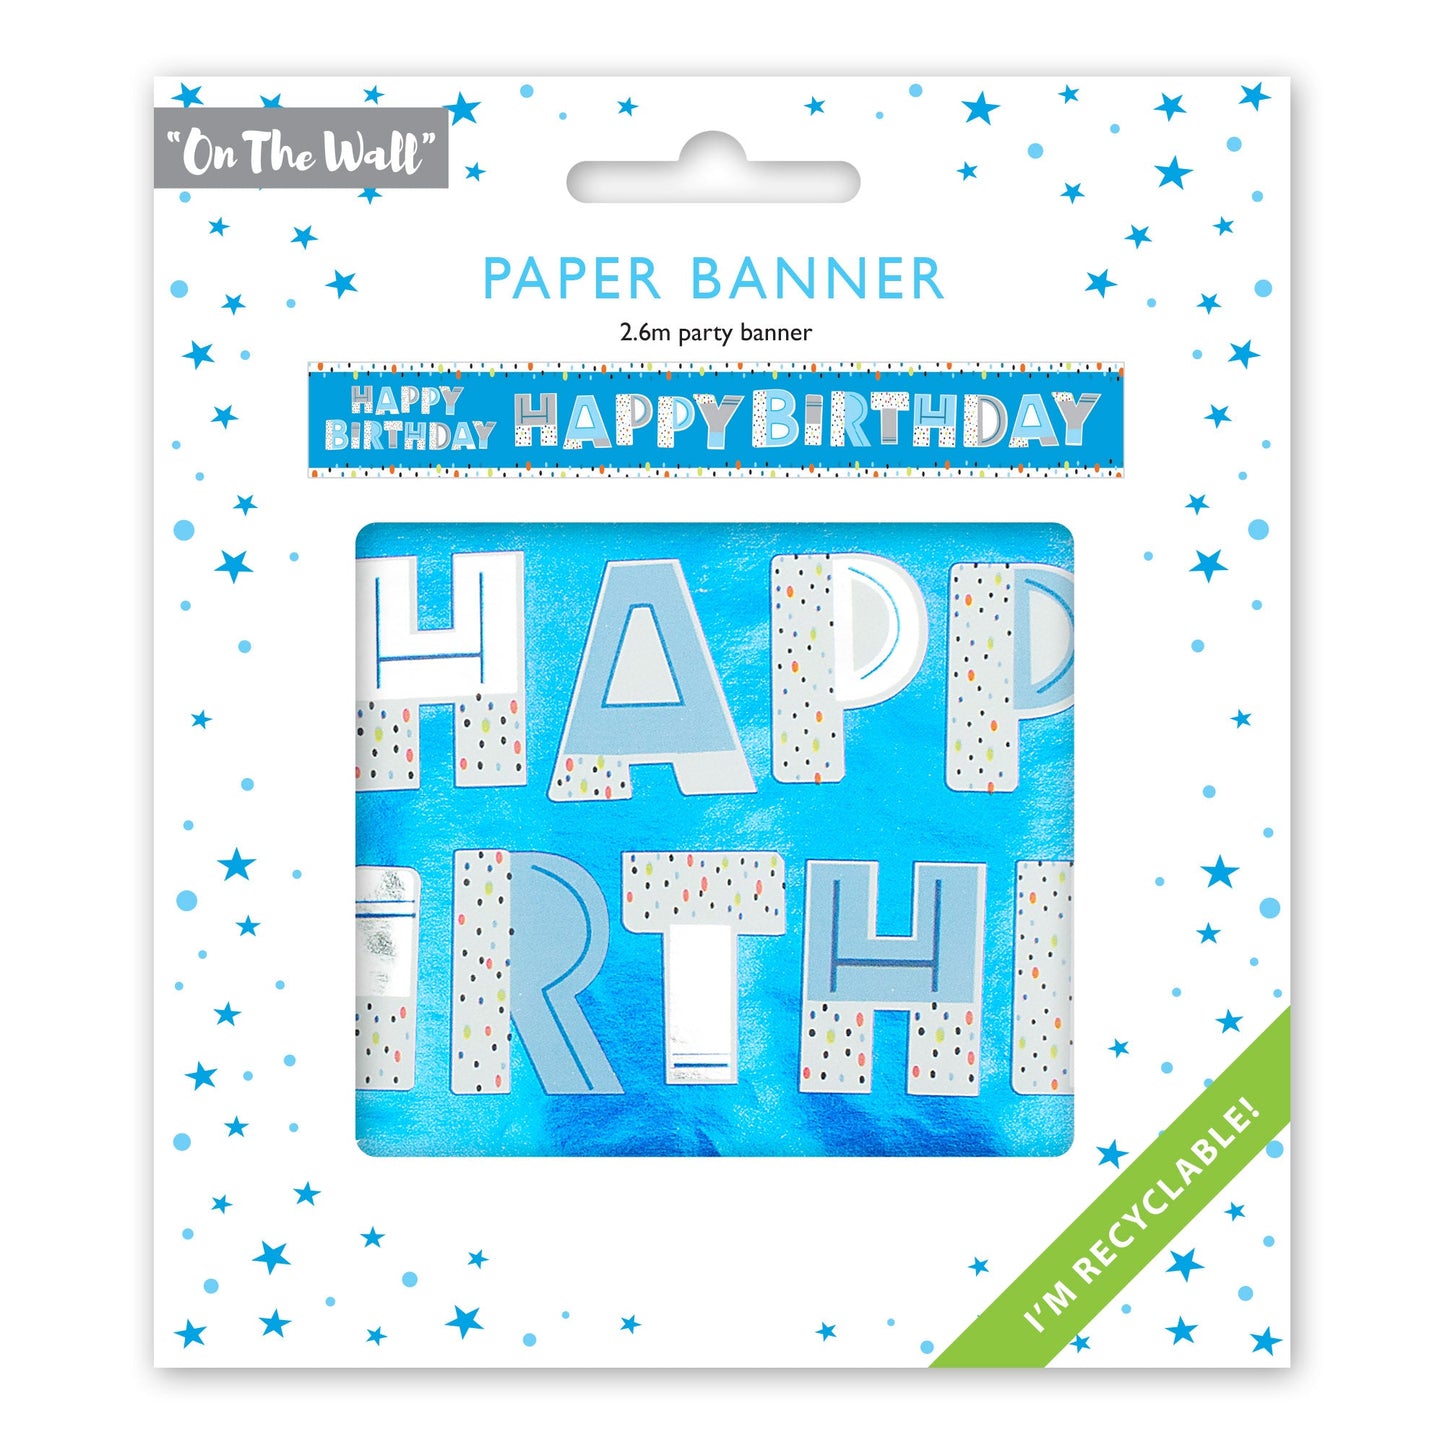 Happy Birthday Recyclable Paper Banner in Blue 2